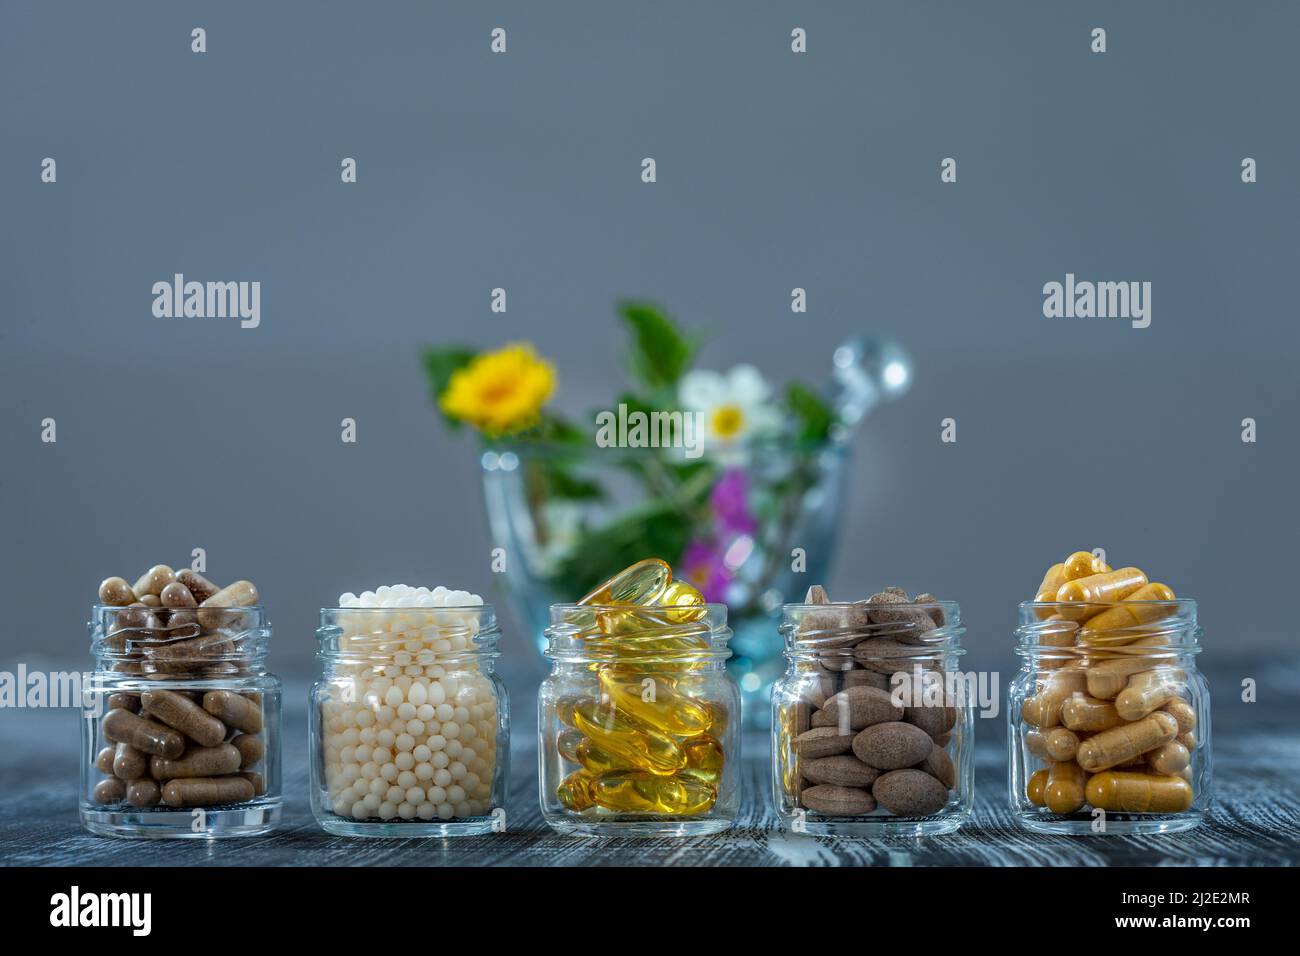 Bottle of pills food suplements healthy medicine, medication health care treatment additives pharmacy with ceramic white mortar with medicinal fresh plants on background Stock Photo